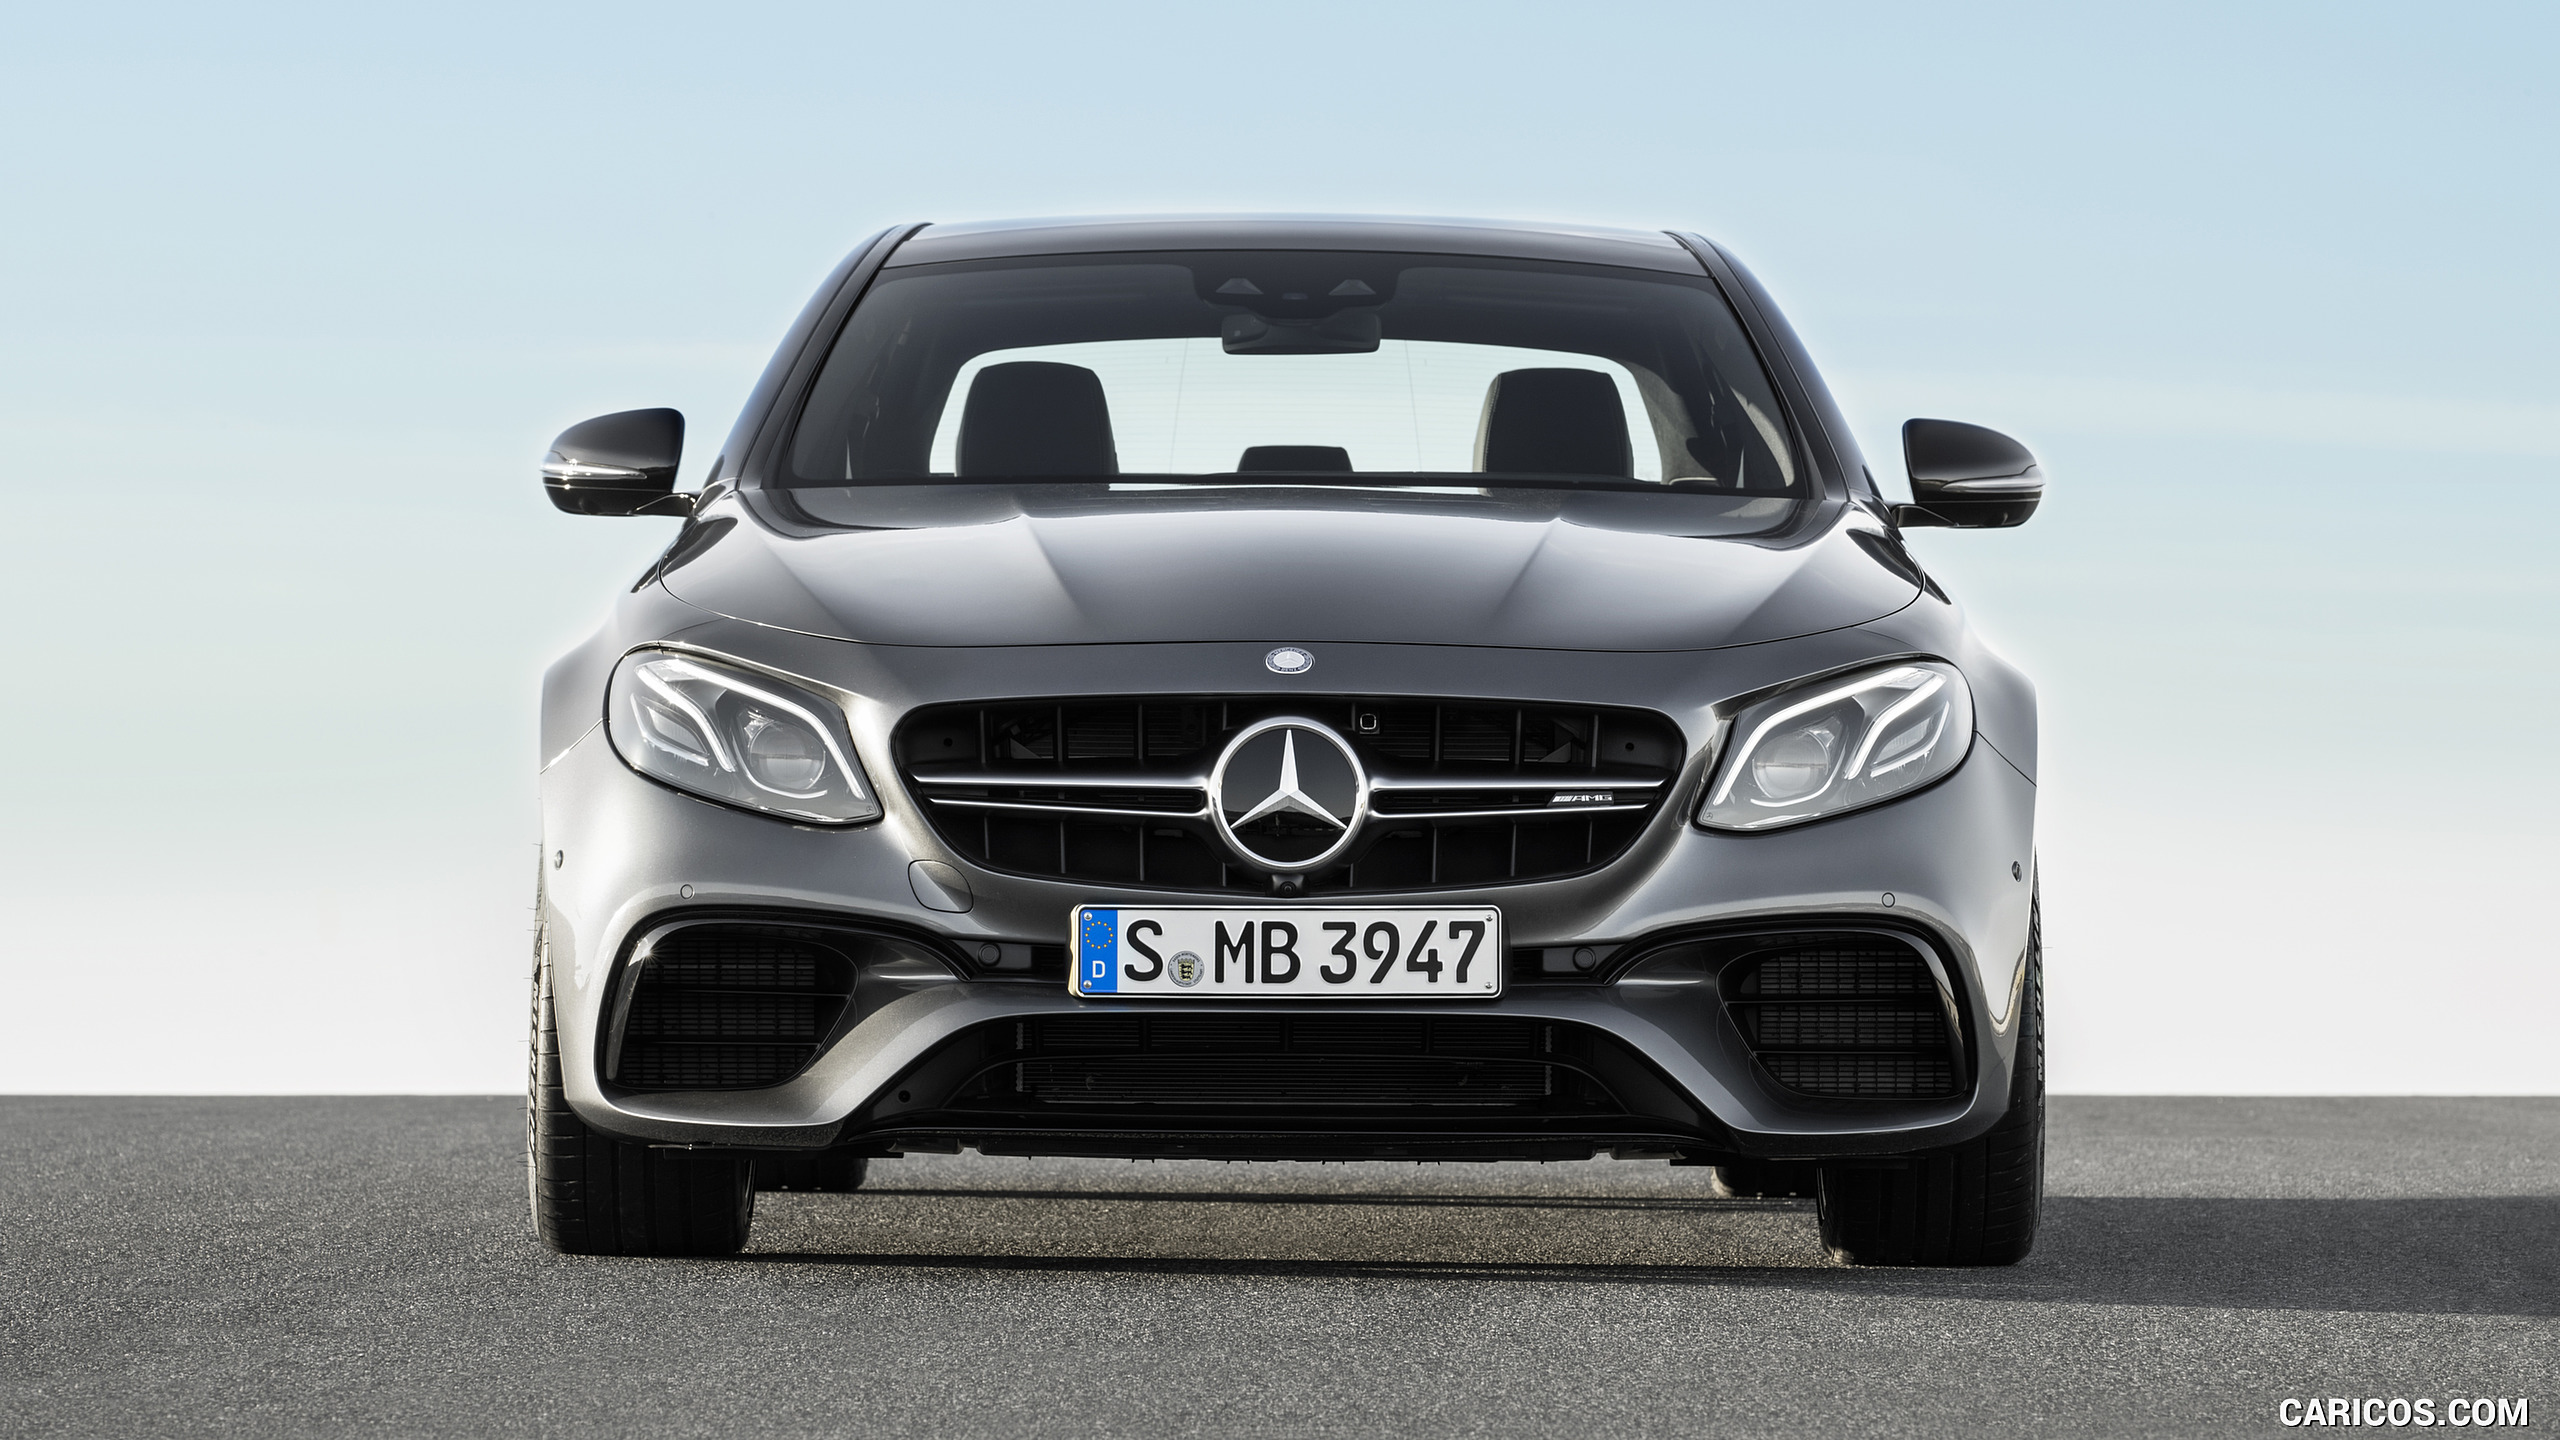 2018 Mercedes-AMG E63 S 4MATIC+ - Front, #27 of 323